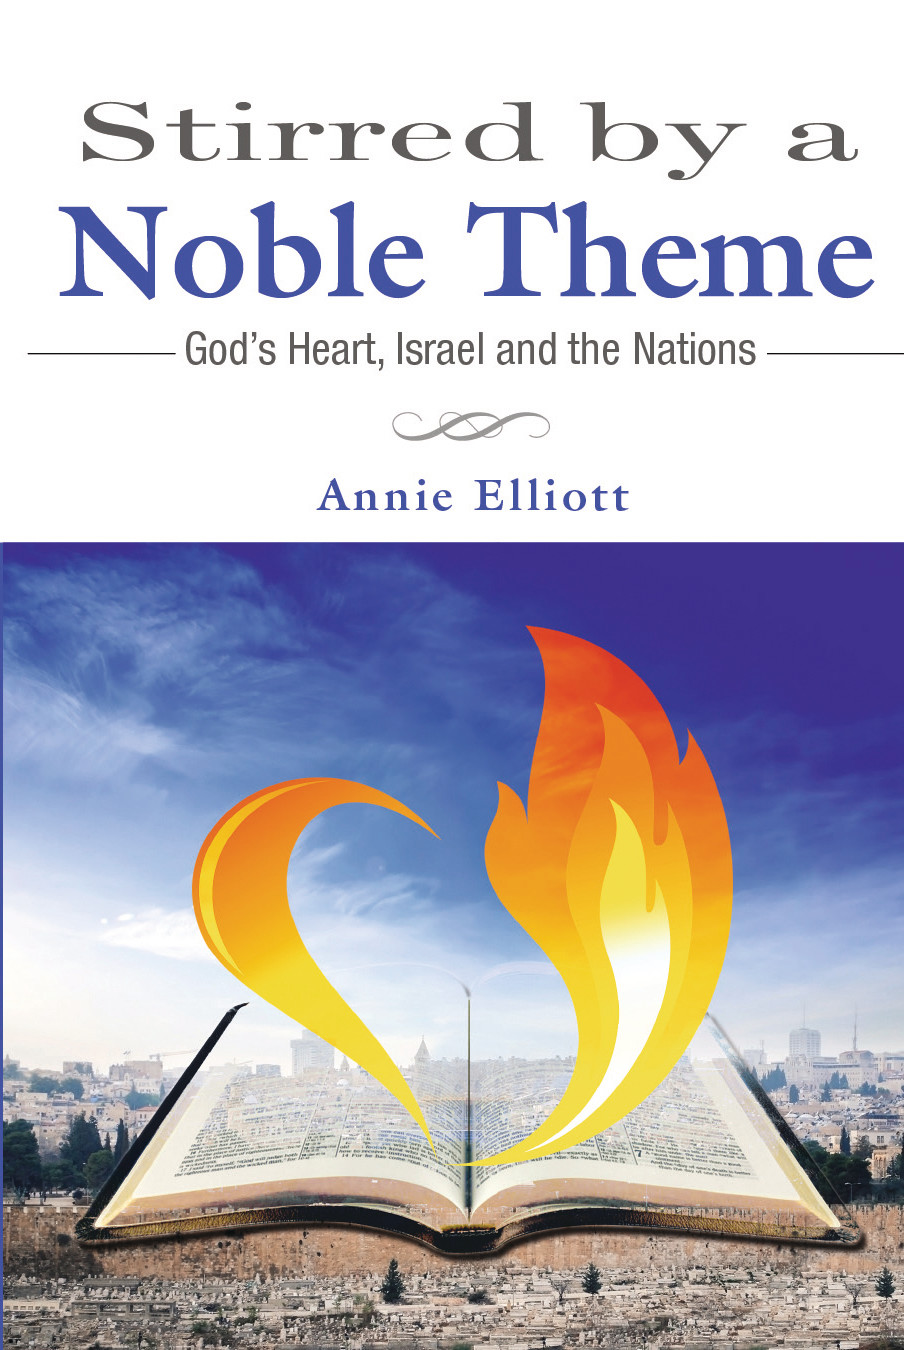 Stirred by a Noble Theme - God's Heart, Israel and the Nations - Annie Elliott